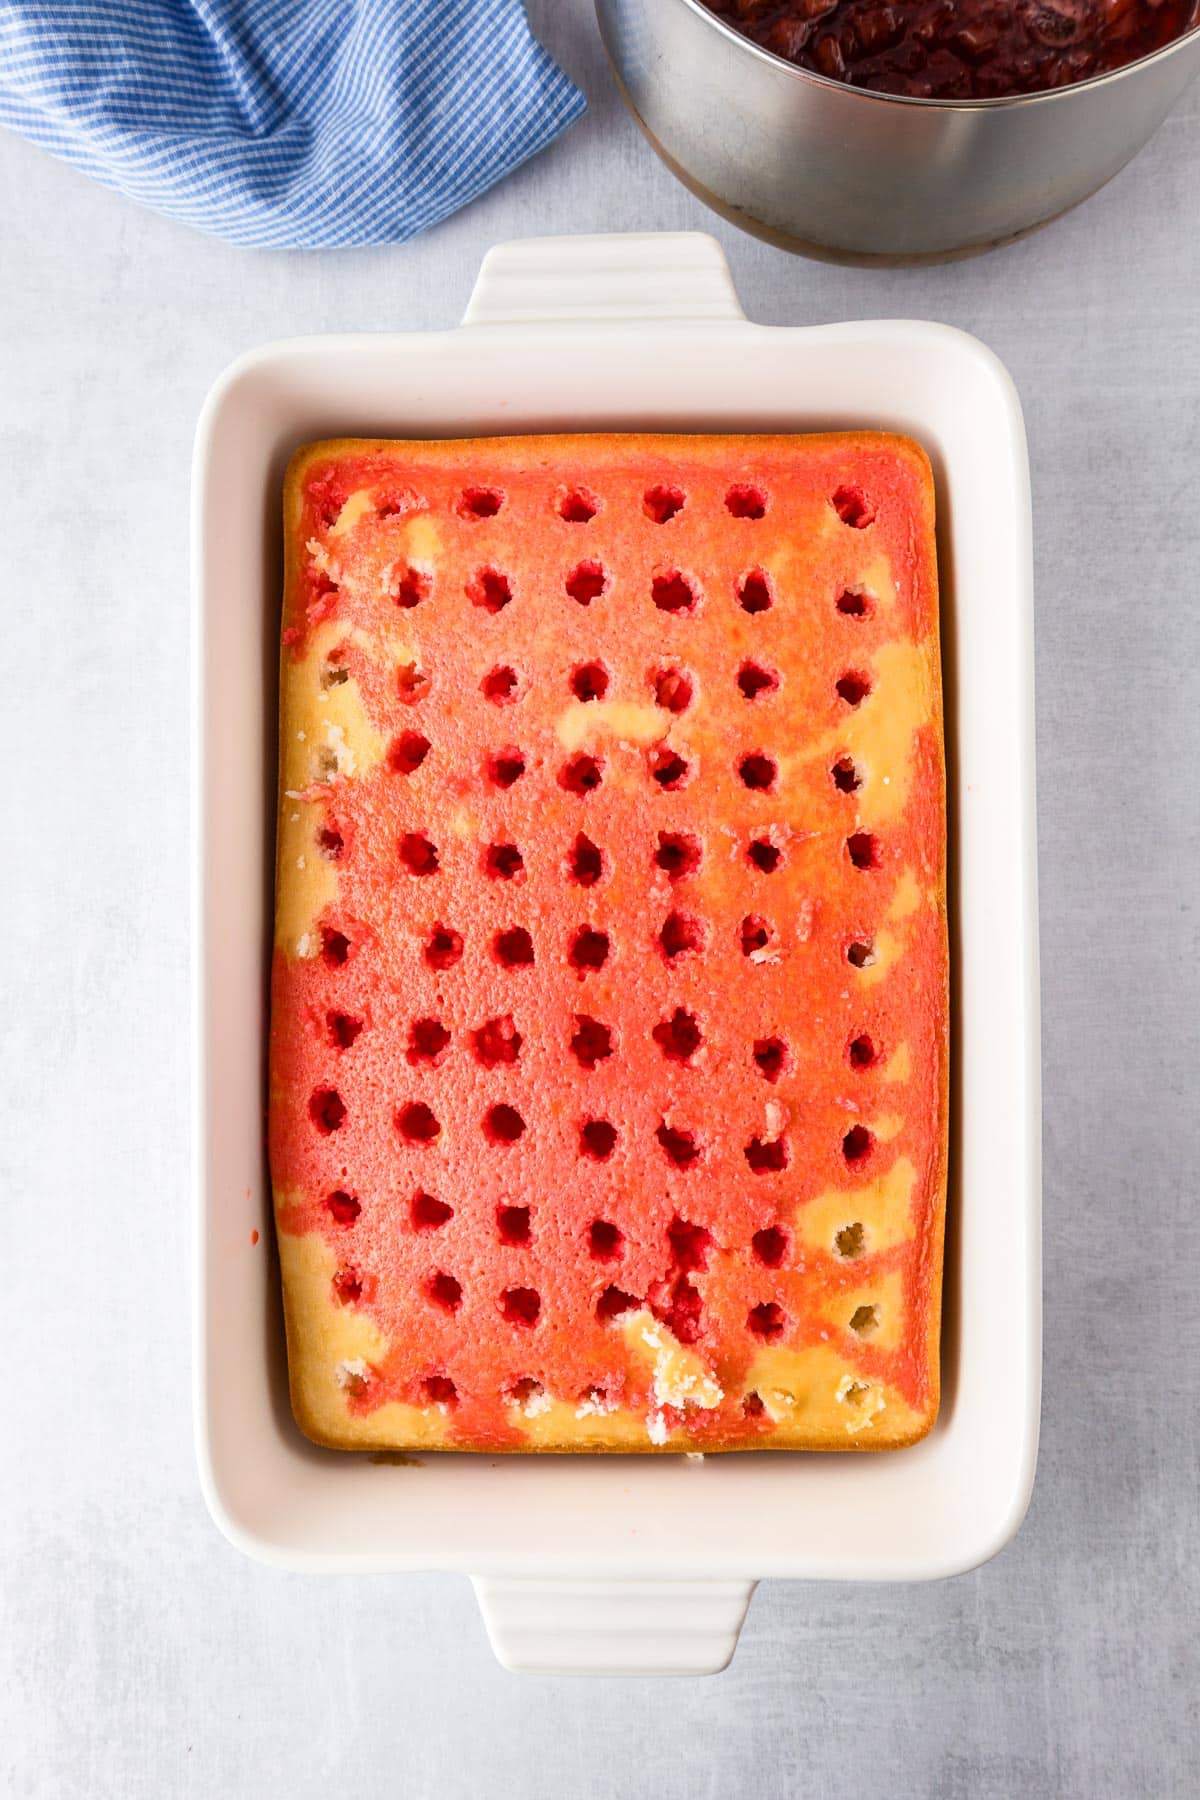 Baking dish with a rectangular cake with evenly space holes in the cake and a red strawberry sauce poured over the cake.